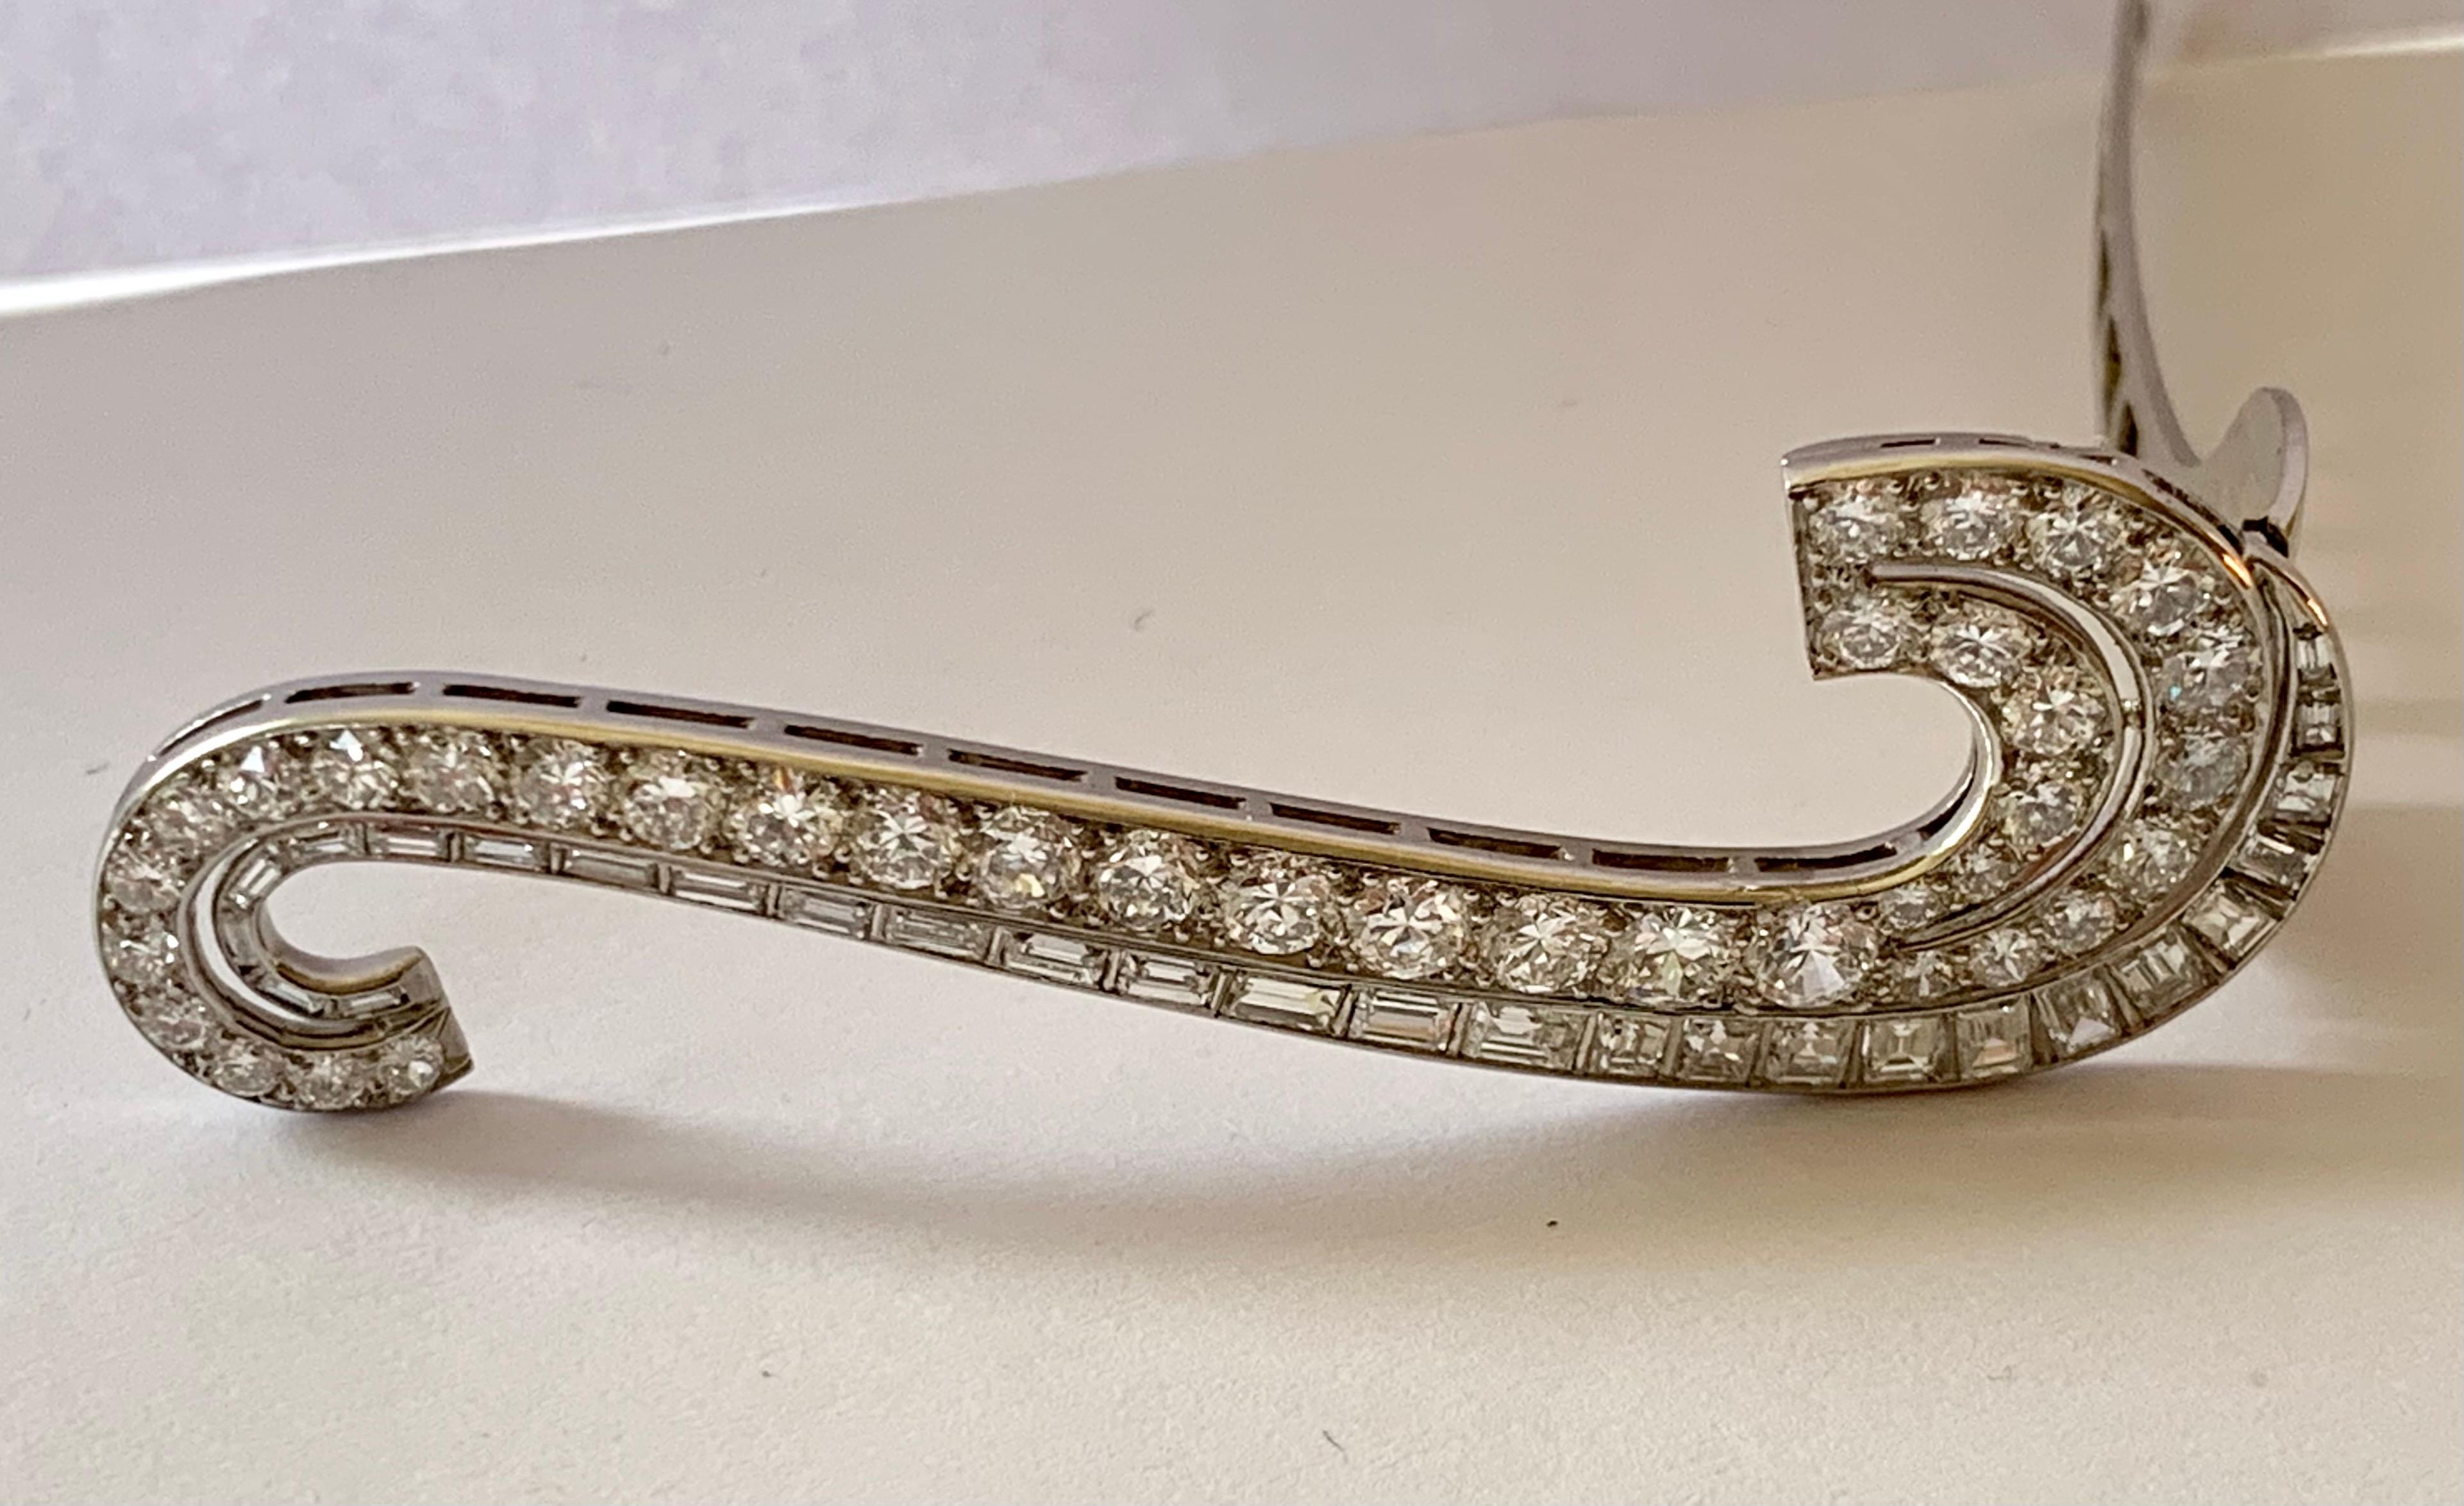  A pair of 18 K white Gold Clips brooches. They feature brilliant cut Diamonds along with baguette cut diamonds with an approximate weight of 10 ct. These beautiful brooches  can be worn as a single brooch, or as a set. A real Vintage eye catcher on